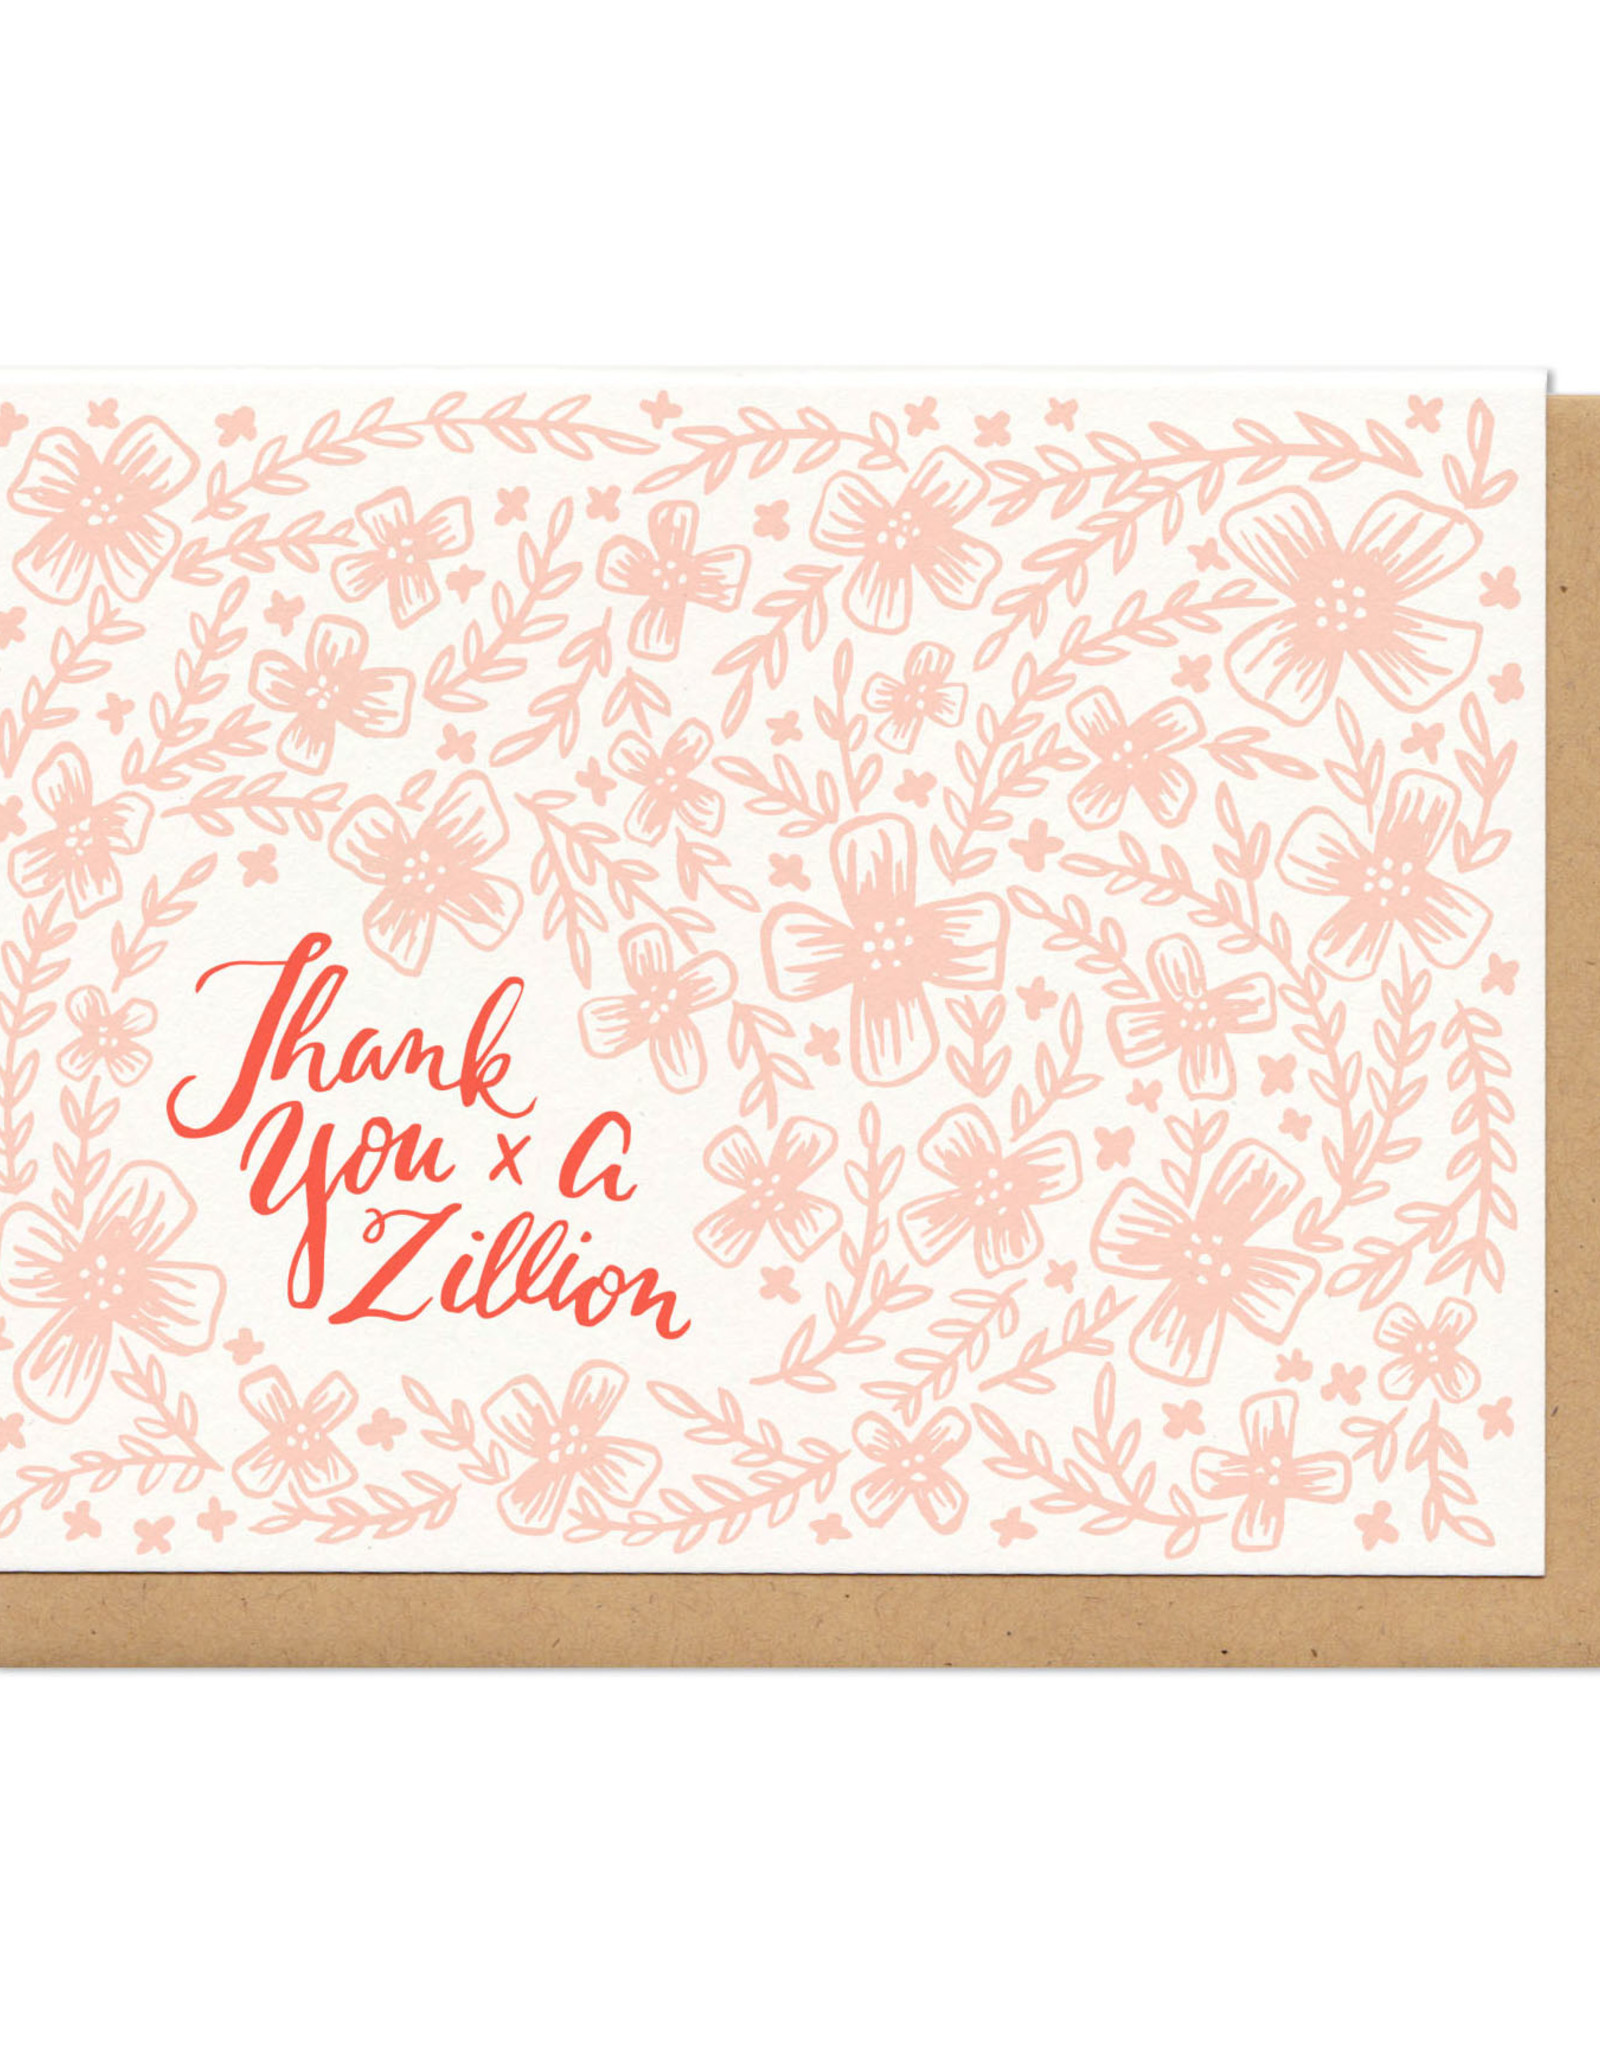 Thank You x A Zillion (Pink) Greeting Card